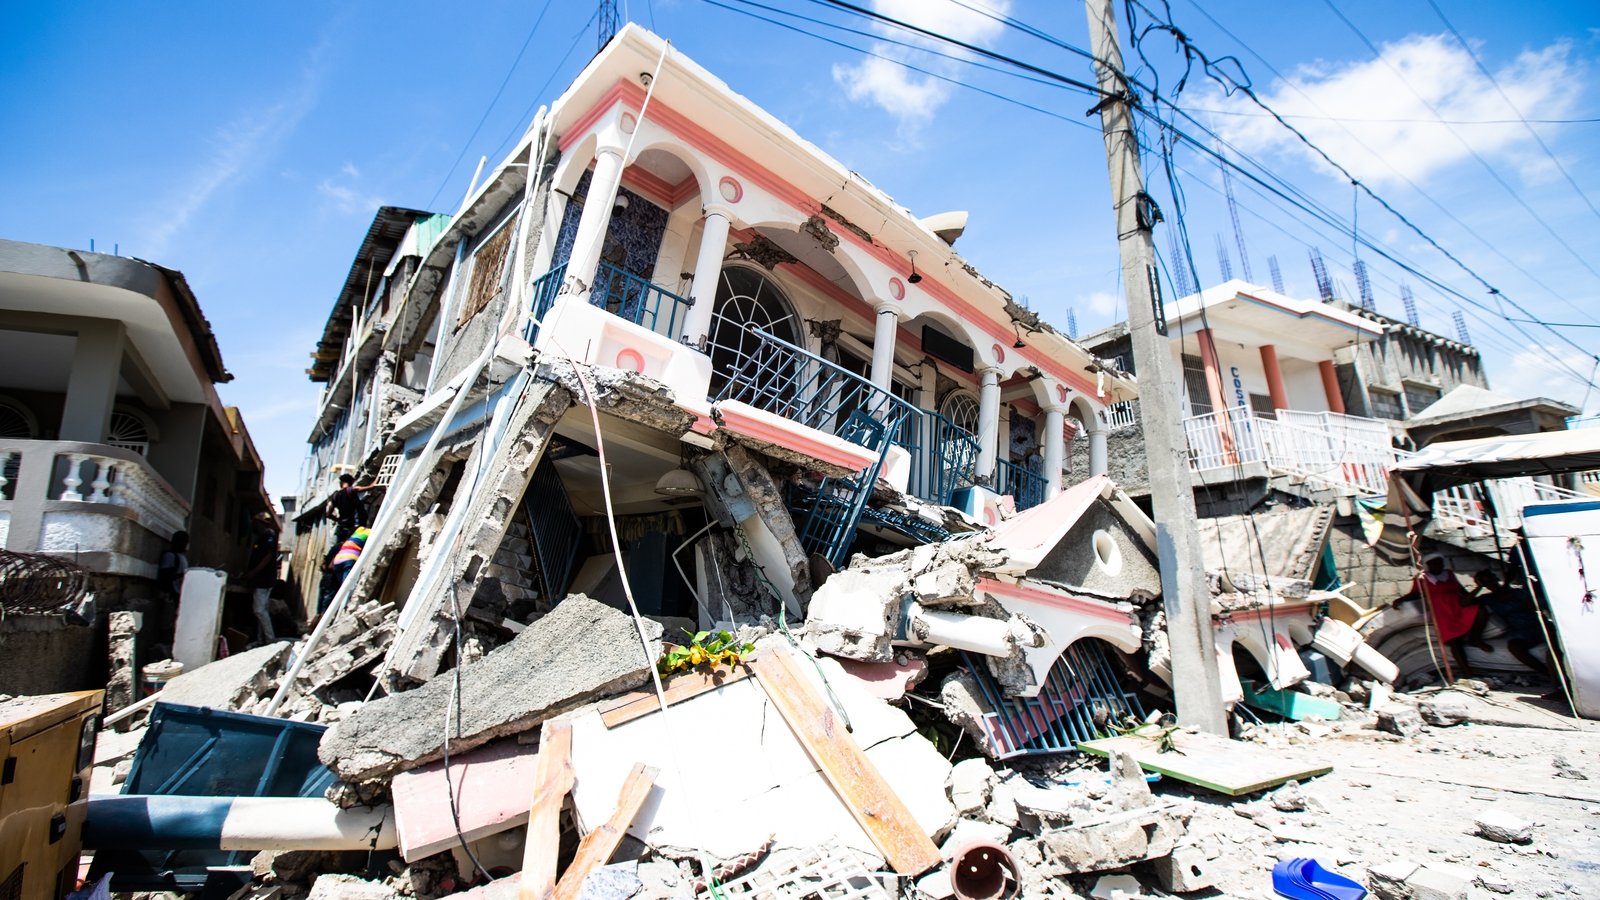 At least 227 dead after powerful earthquake hits Haiti